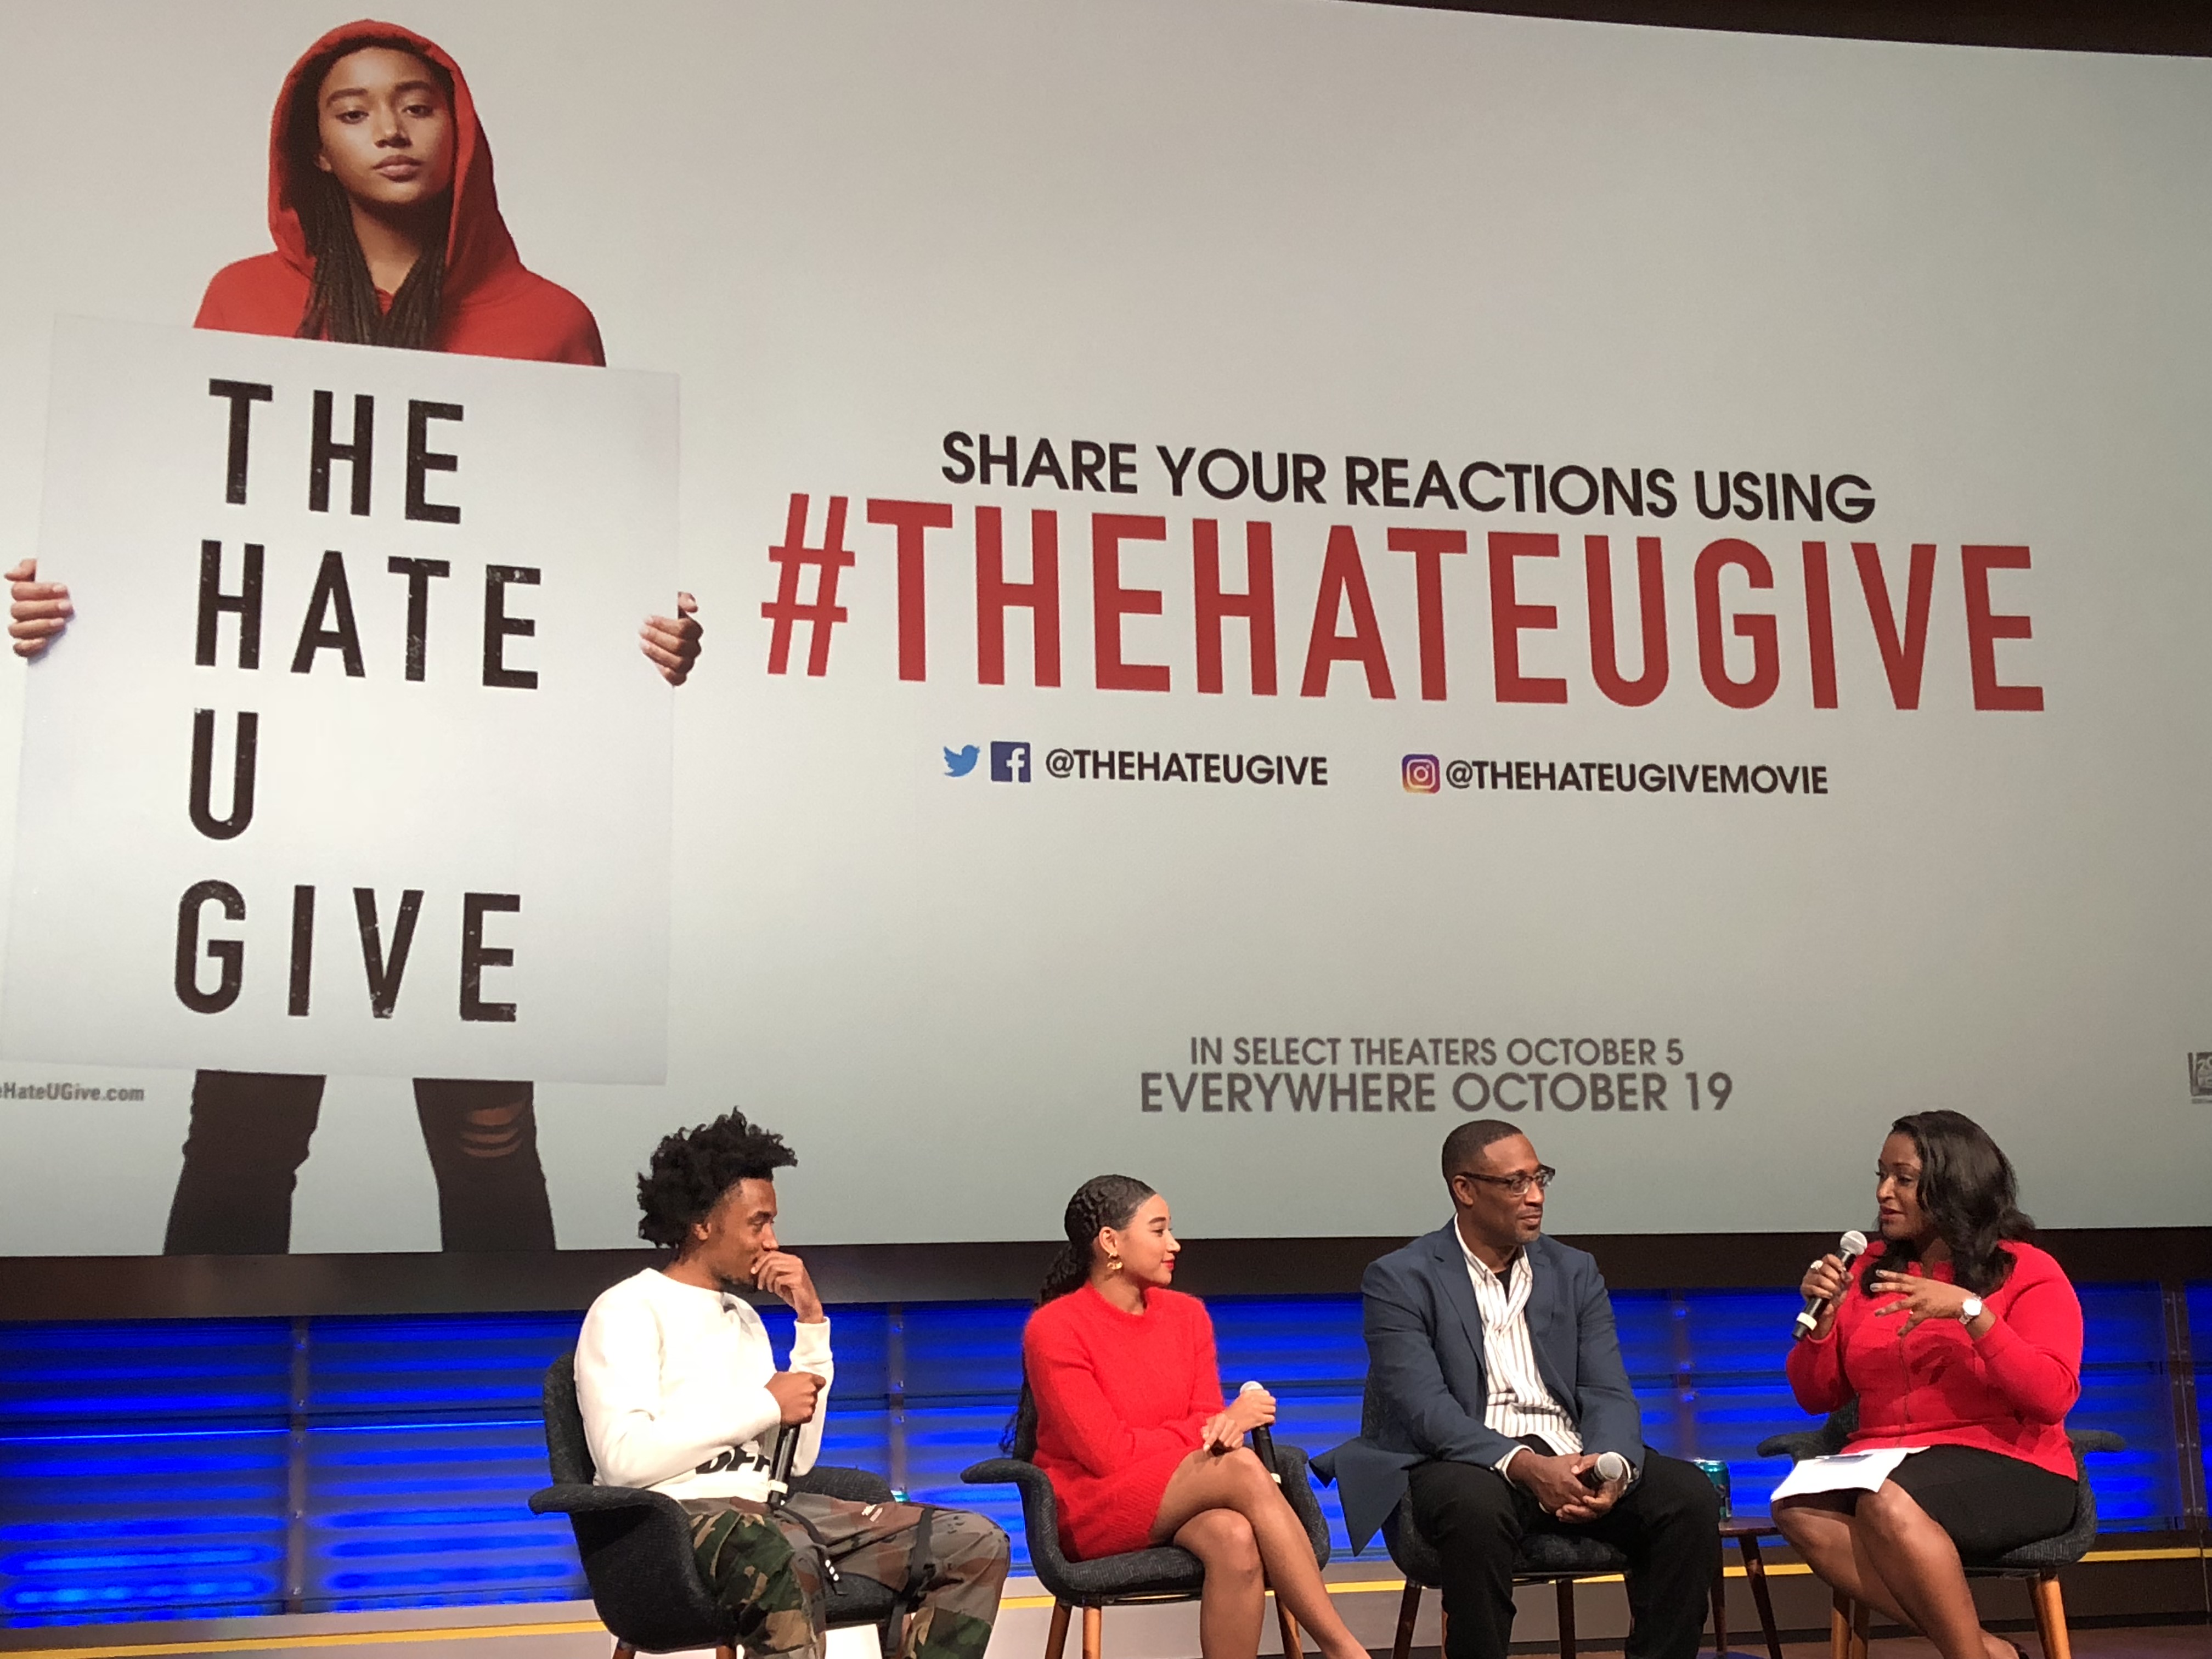 National Geographic’s Screening of The Hate U Give